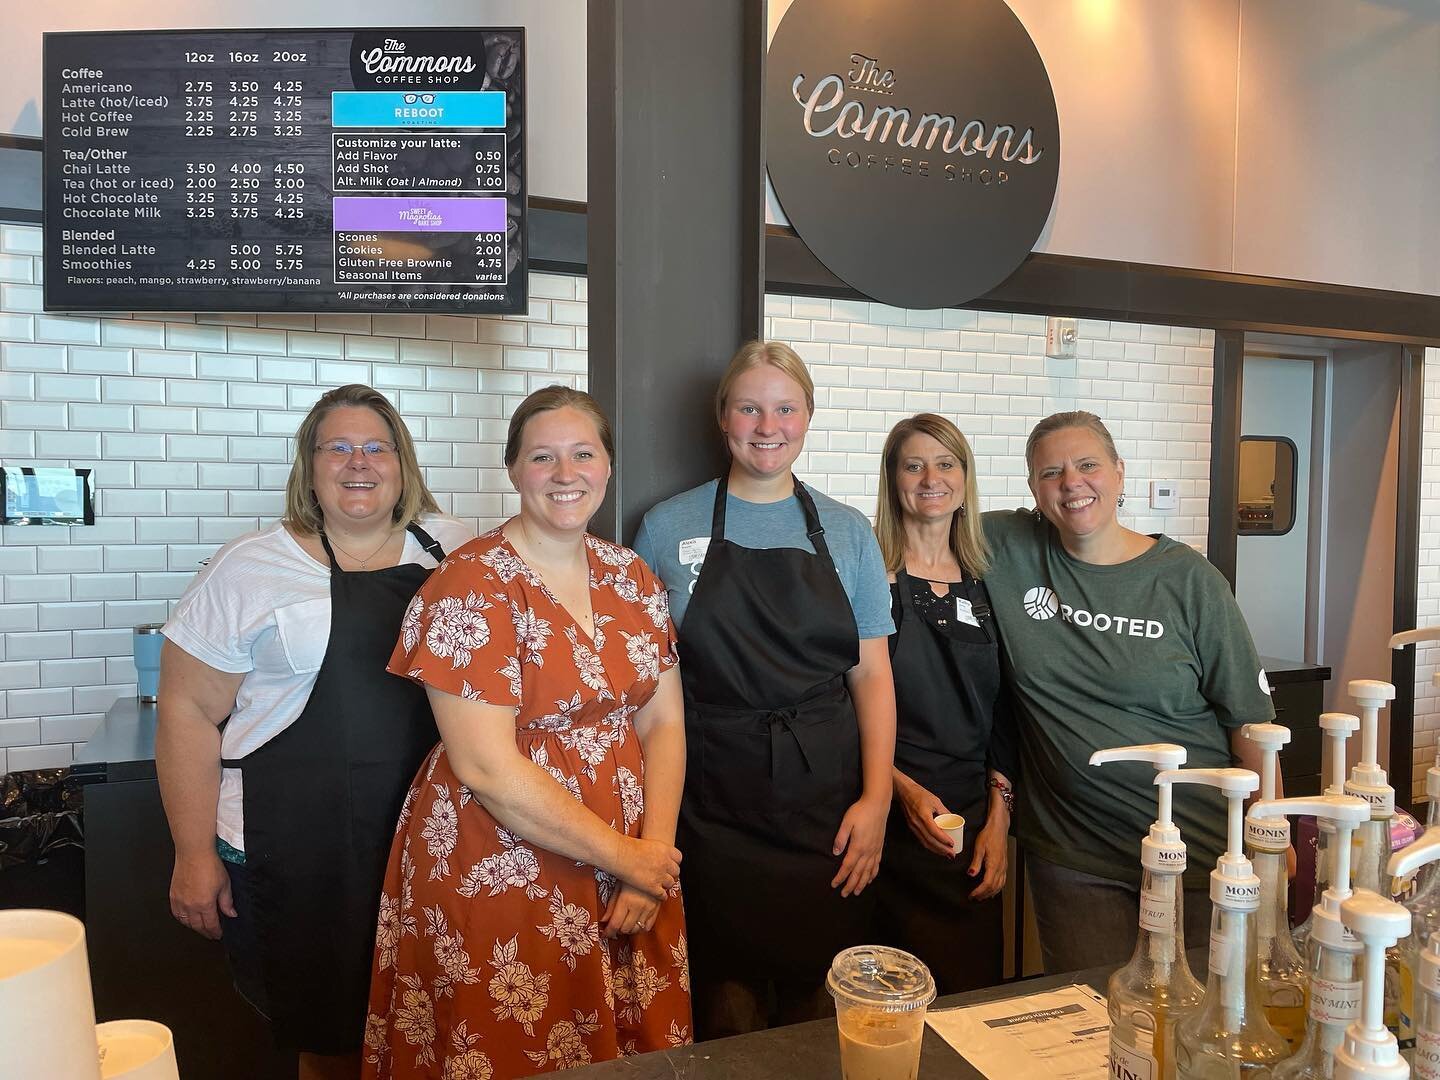 Happy Sunday, everyone! We love serving coffee, Jesus, and YOU! Stop on by Sunday through Friday to see our smiling faces (we sleep in on Saturday&rsquo;s, so you should too!). Can&rsquo;t wait to see you at The Commons Coffee Shop @stonebridgeccne ☕